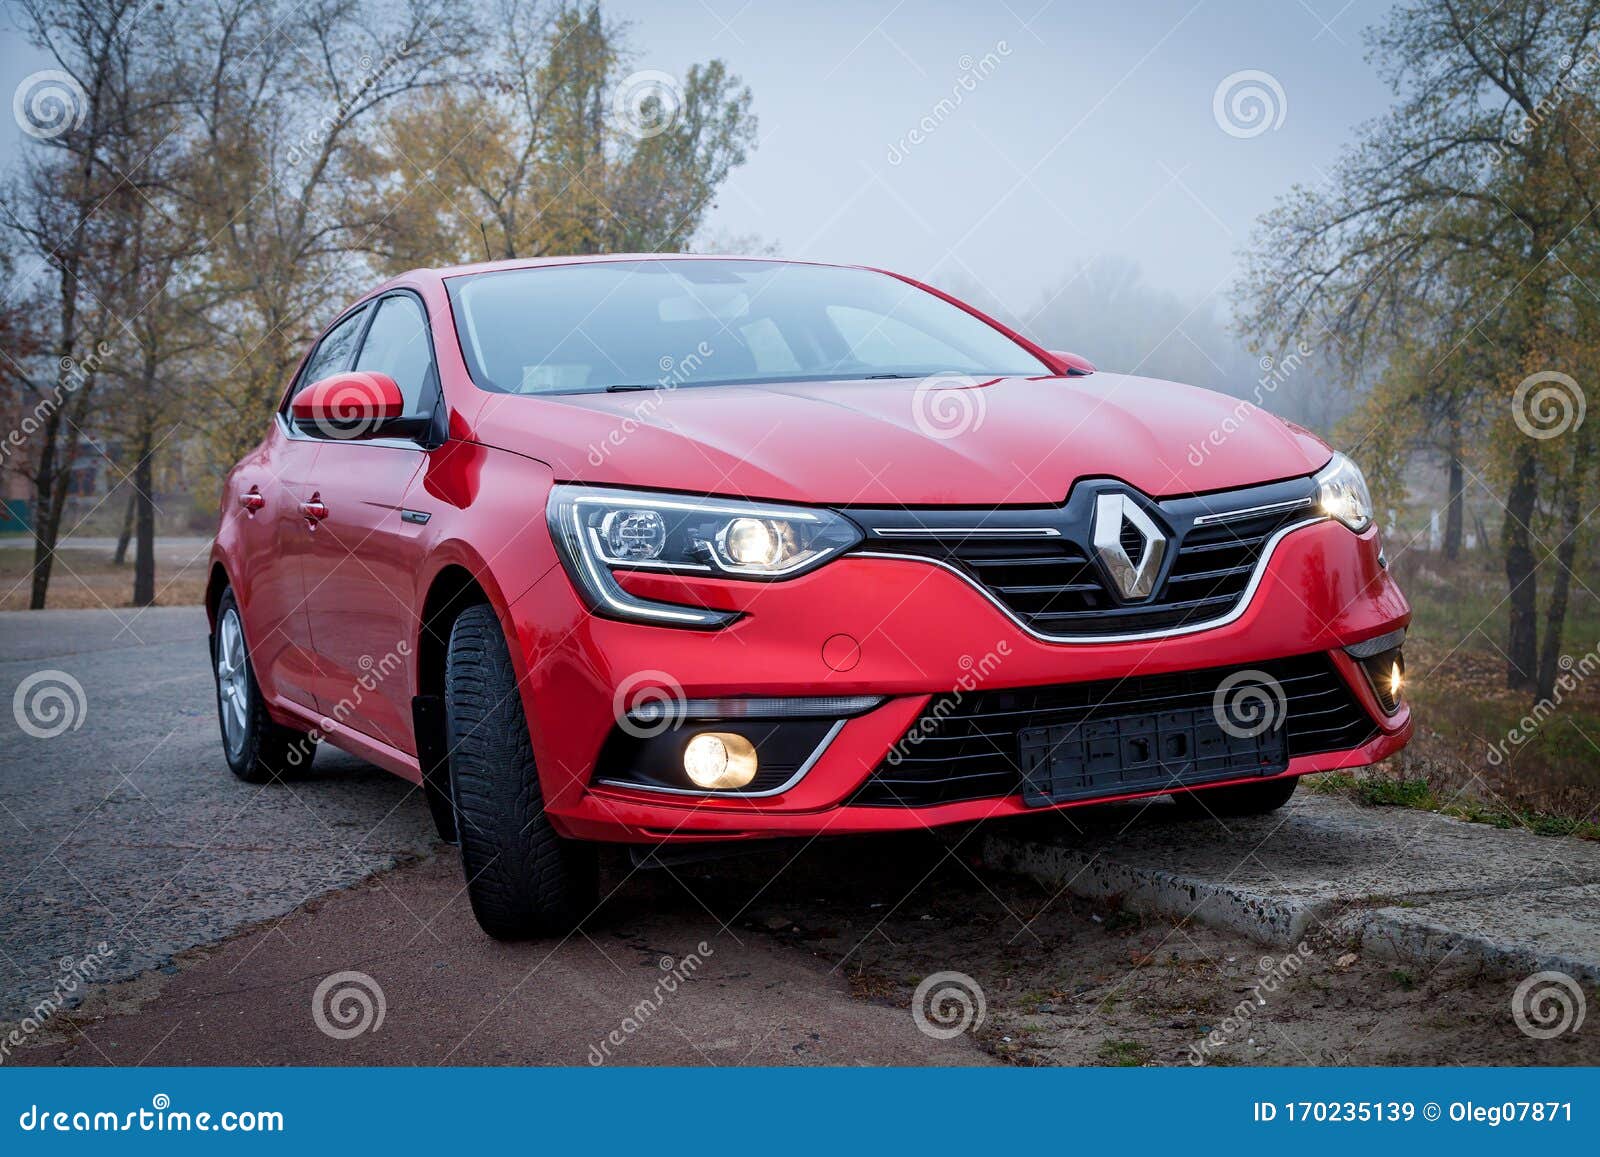 Front-side View of a Car Renault Megane Sedan Red Color on Nature Background Editorial Stock Image Image of detail, back: